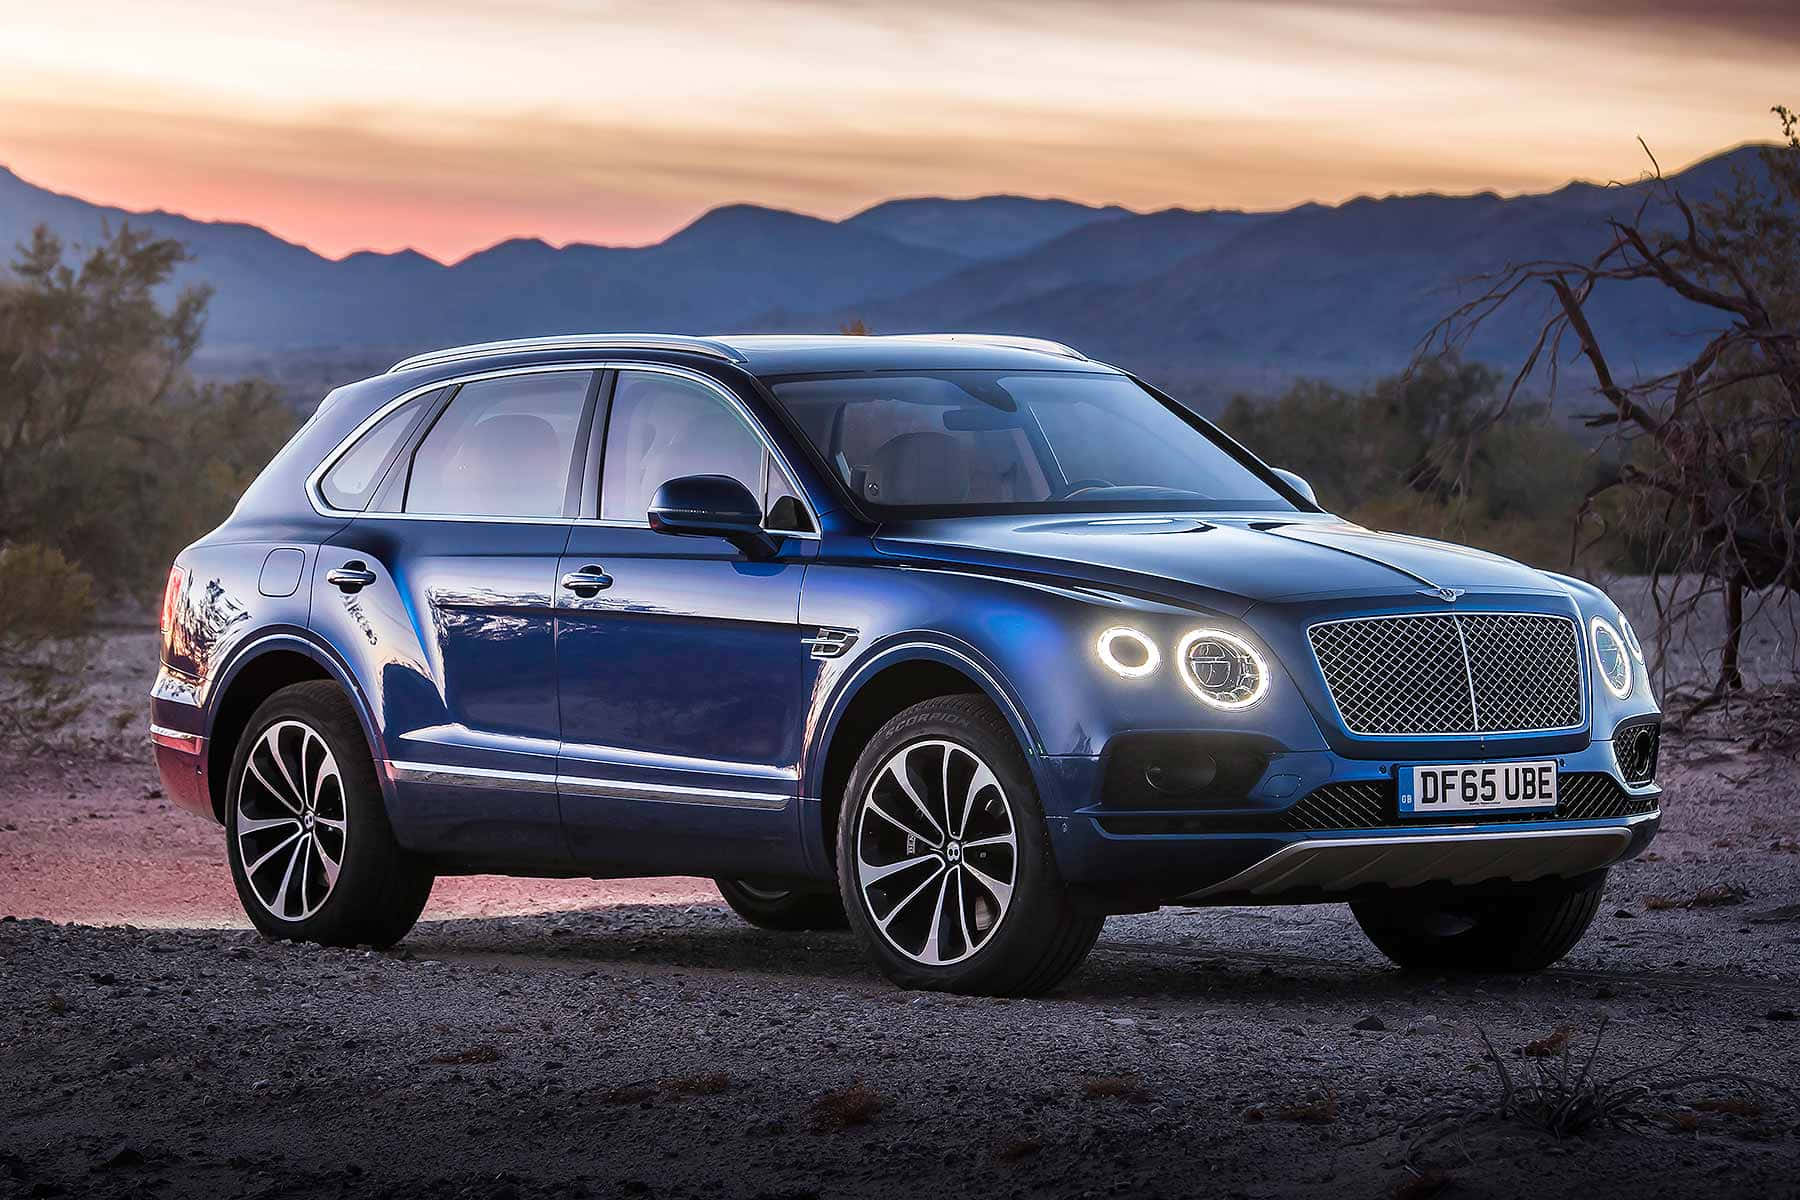 Experience the luxury and quality of Bentley in this picture